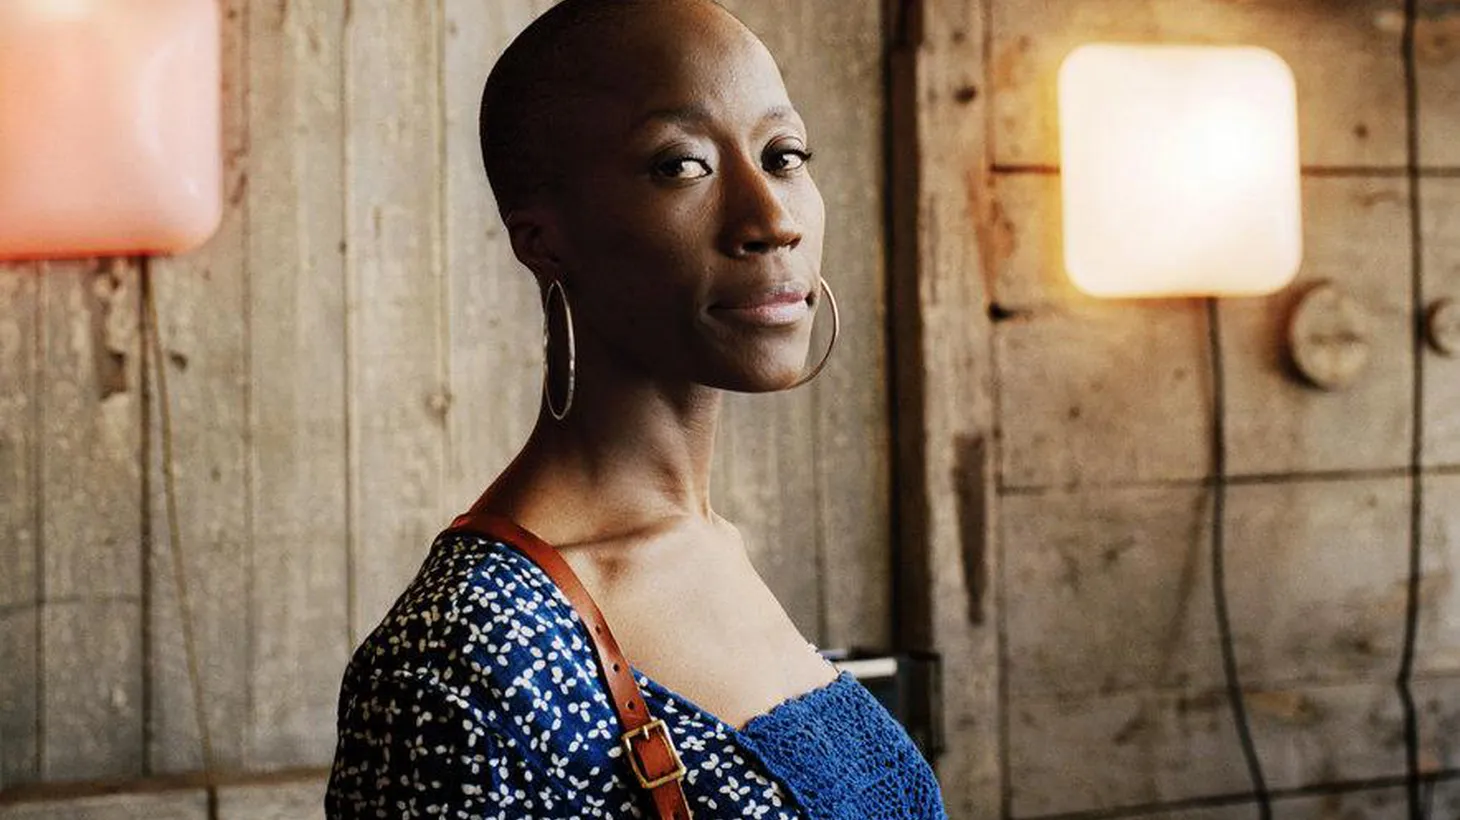 Award-winning Malian singer, songwriter and guitarist Rokia Traoré will join us for a live solo performance on Morning Becomes Eclectic at 11:15am.